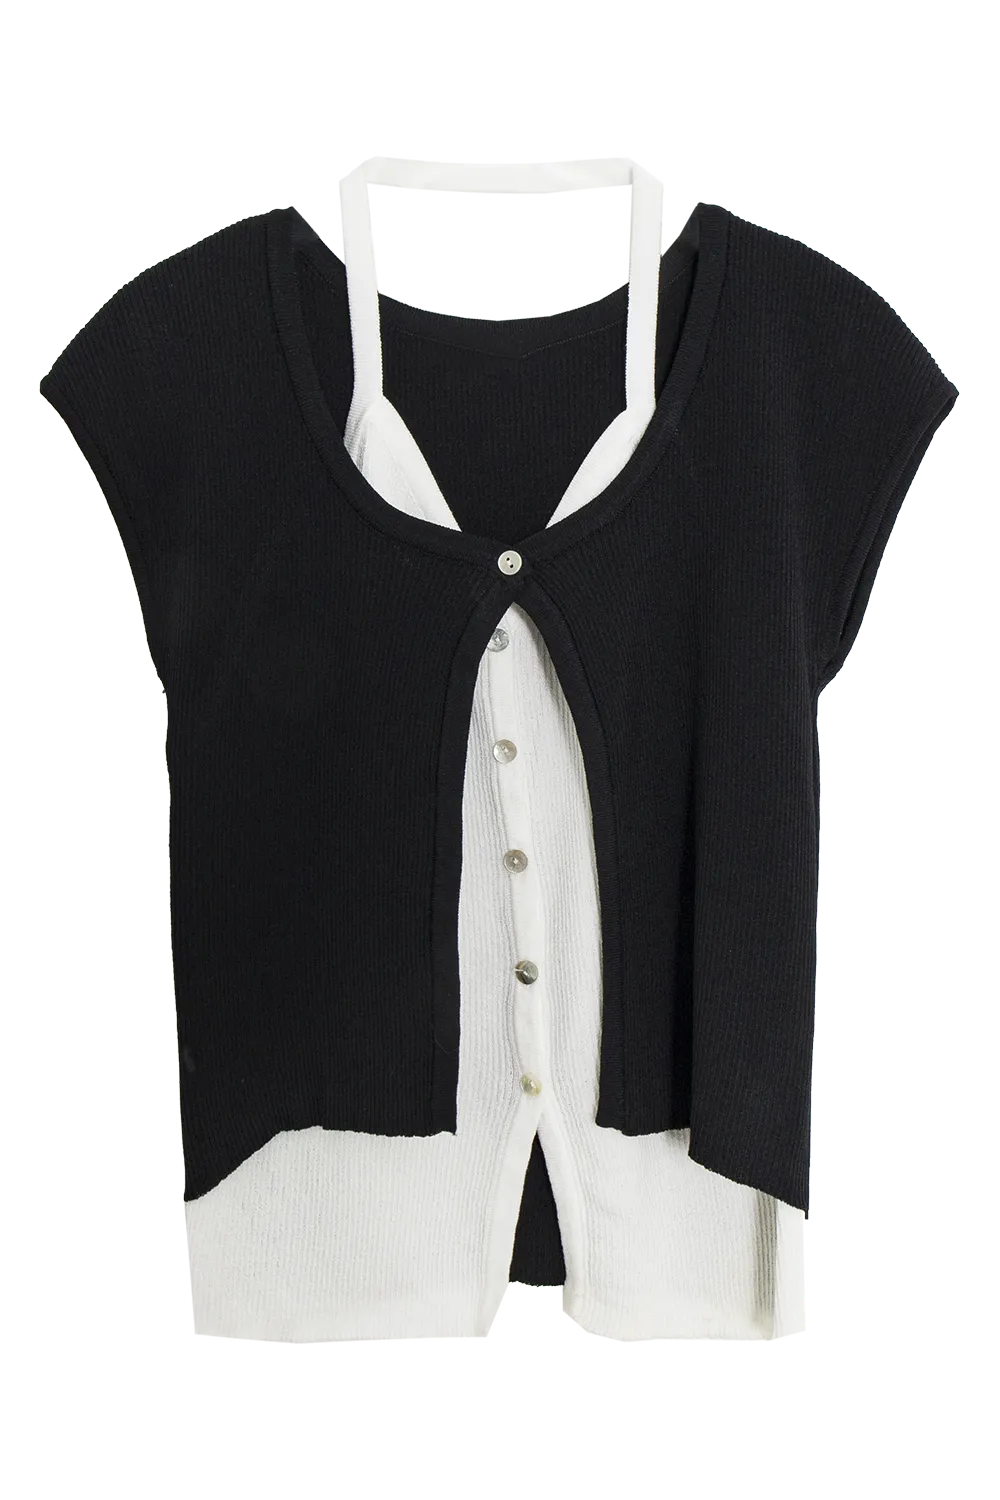 Women's Faux Layered T-Shirt with Cardigan and Camisole Design